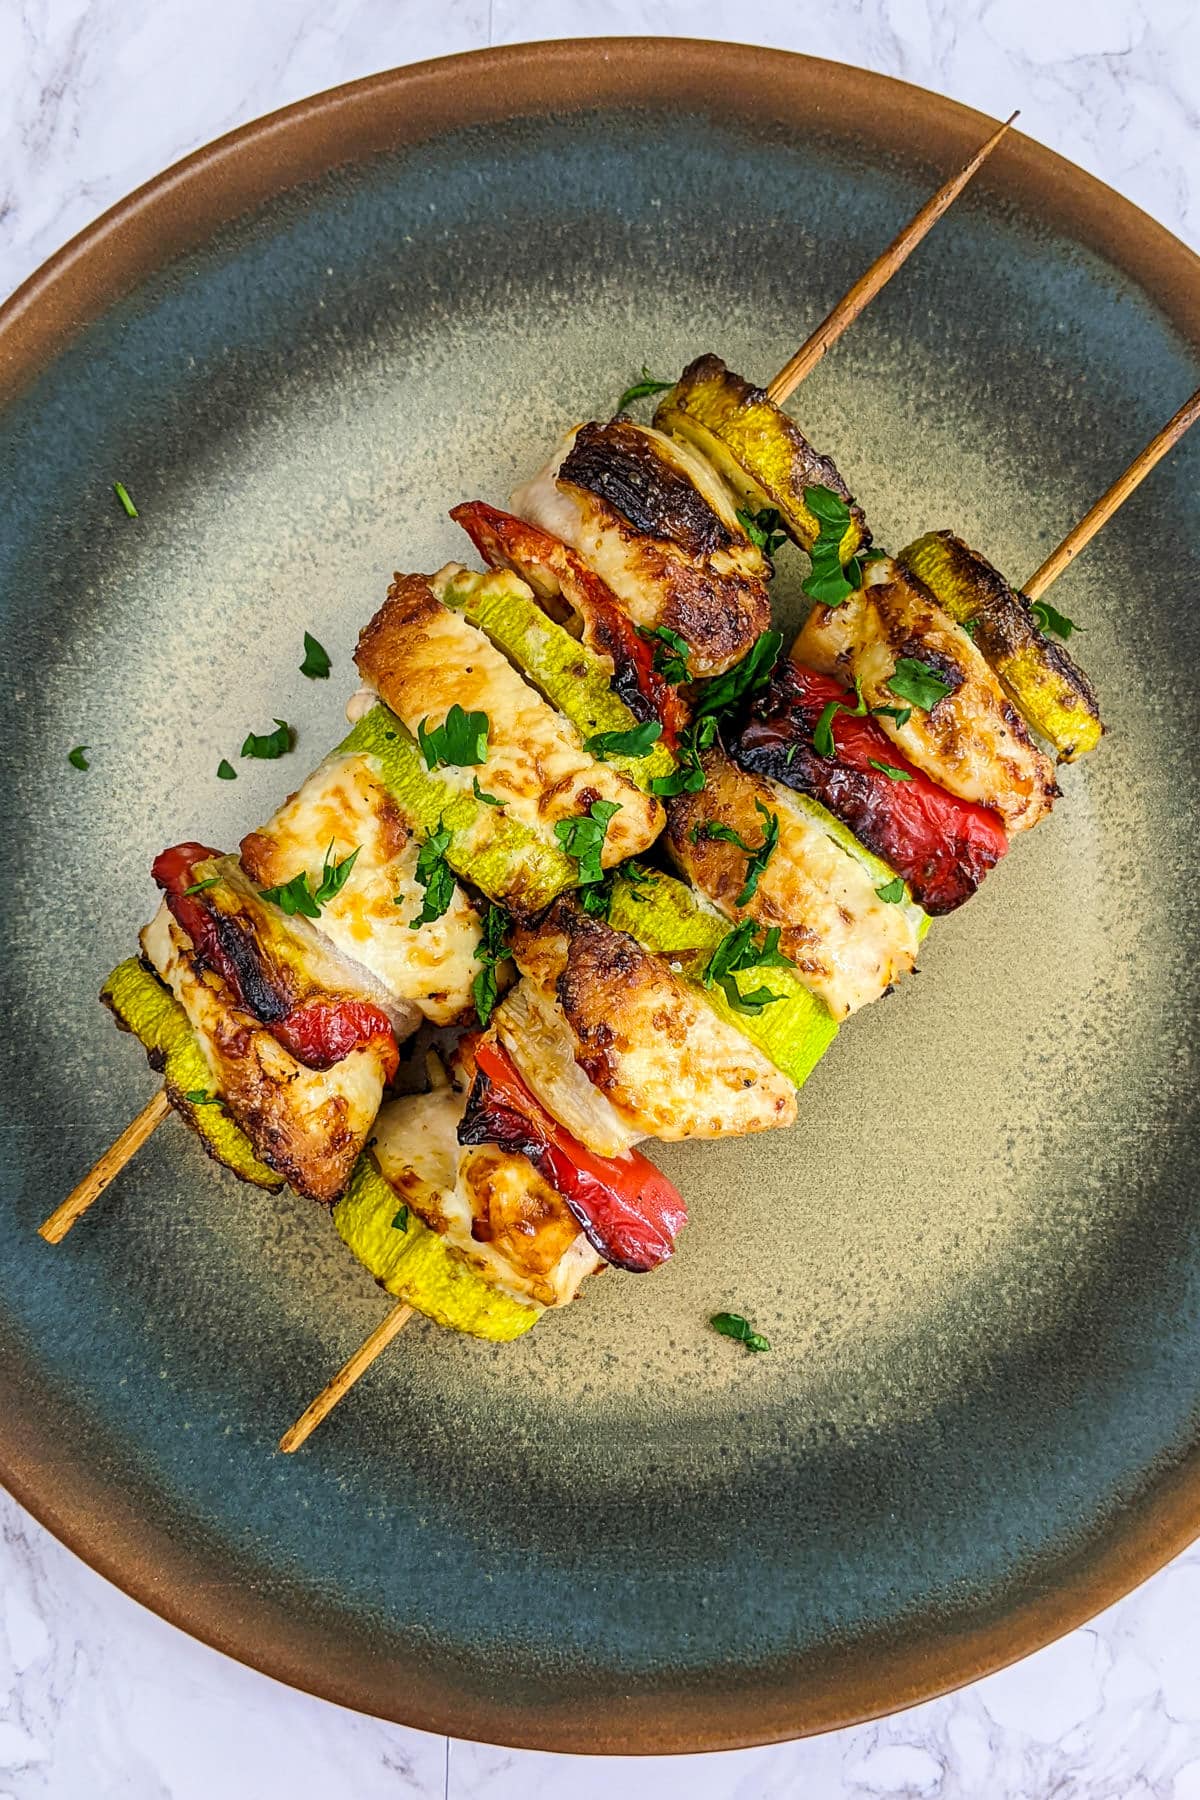 Top view of chicken skewers with diced parsley.